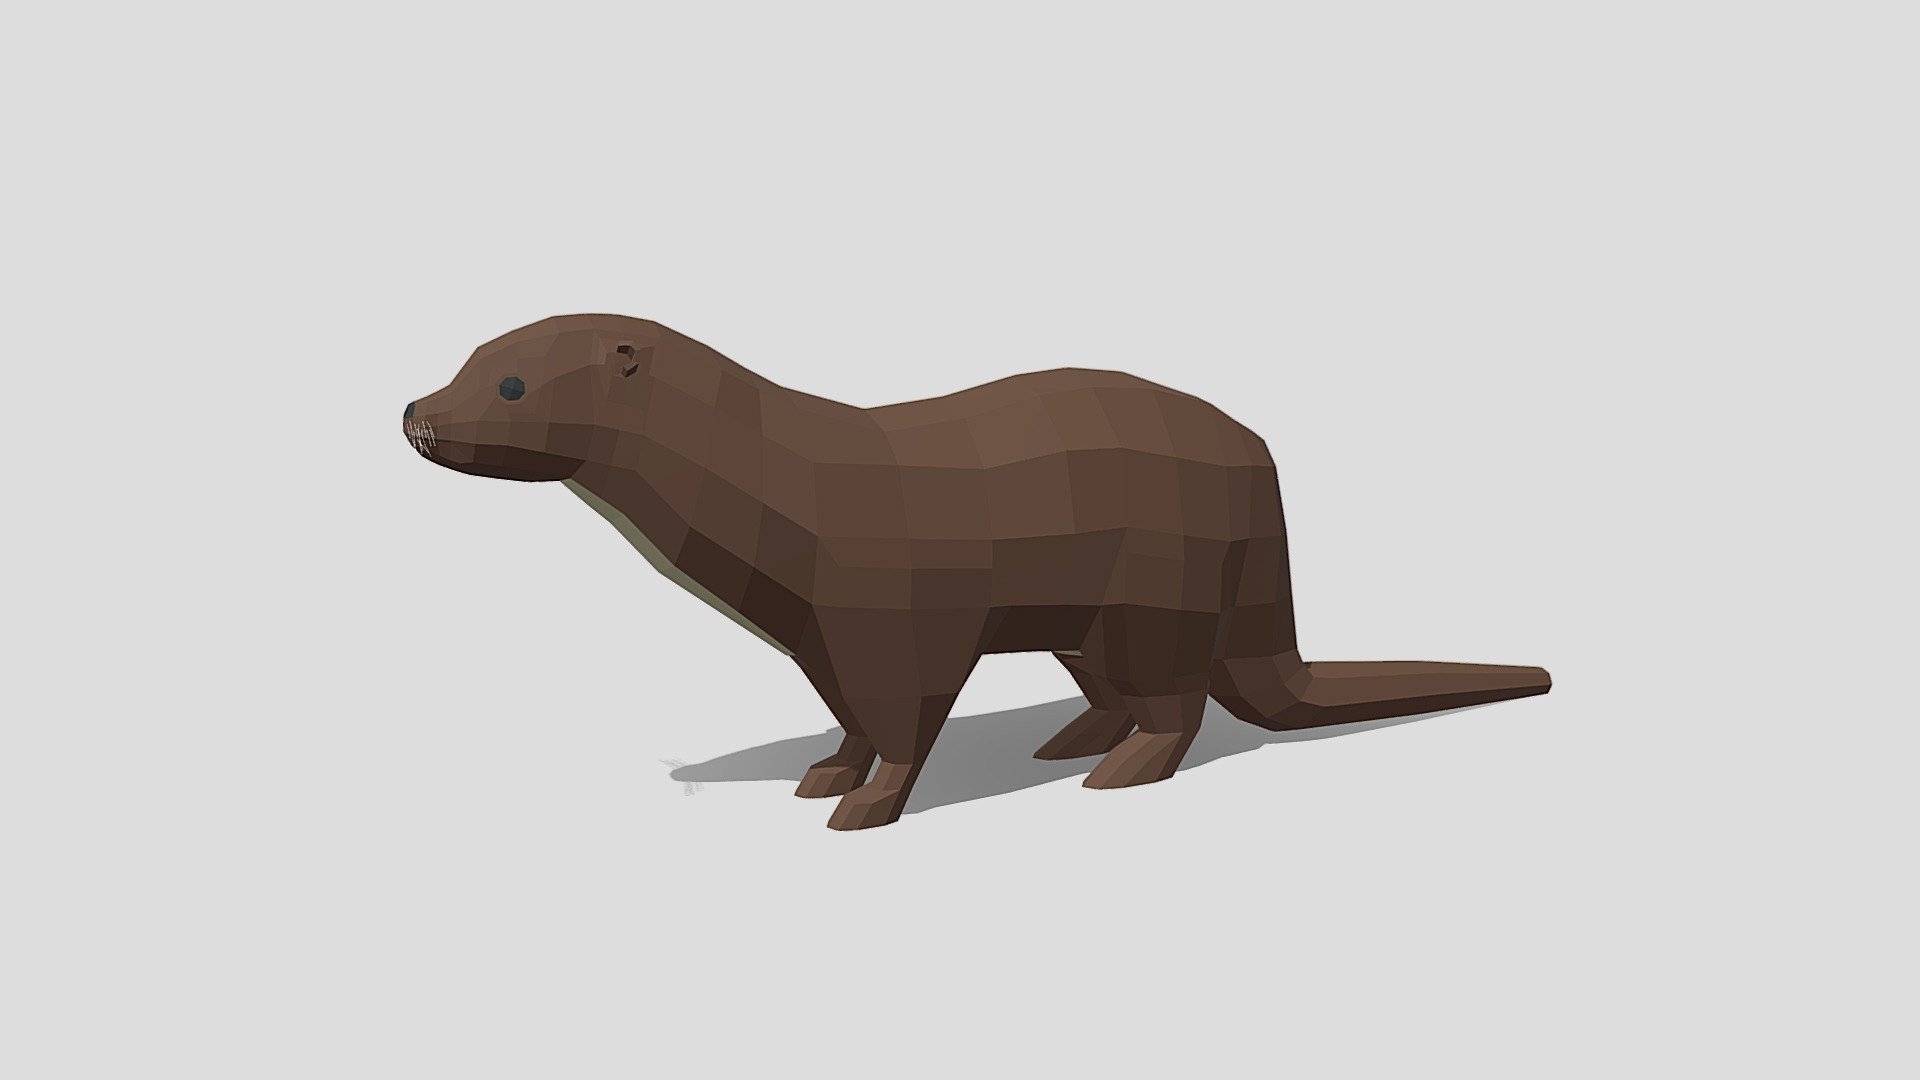 This is a low poly 3d model of an otter. The low poly otter was modeled and prepared for low-poly style renderings, background, general CG visualization presented as a mesh with quads only.

Verts : 1.332 Faces: 1.286

The 3D model have simple materials with diffuse colors.

No ring, maps and no UVW mapping is available.

The original file was created in blender. You will receive a 3DS, OBJ, FBX, blend, DAE, Stl.

All preview images were rendered with Blender Cycles. Product is ready to render out-of-the-box. Please note that the lights, cameras, and background is only included in the .blend file. The model is clean and alone in the other provided files, centred at origin and has real-world scale 3d model